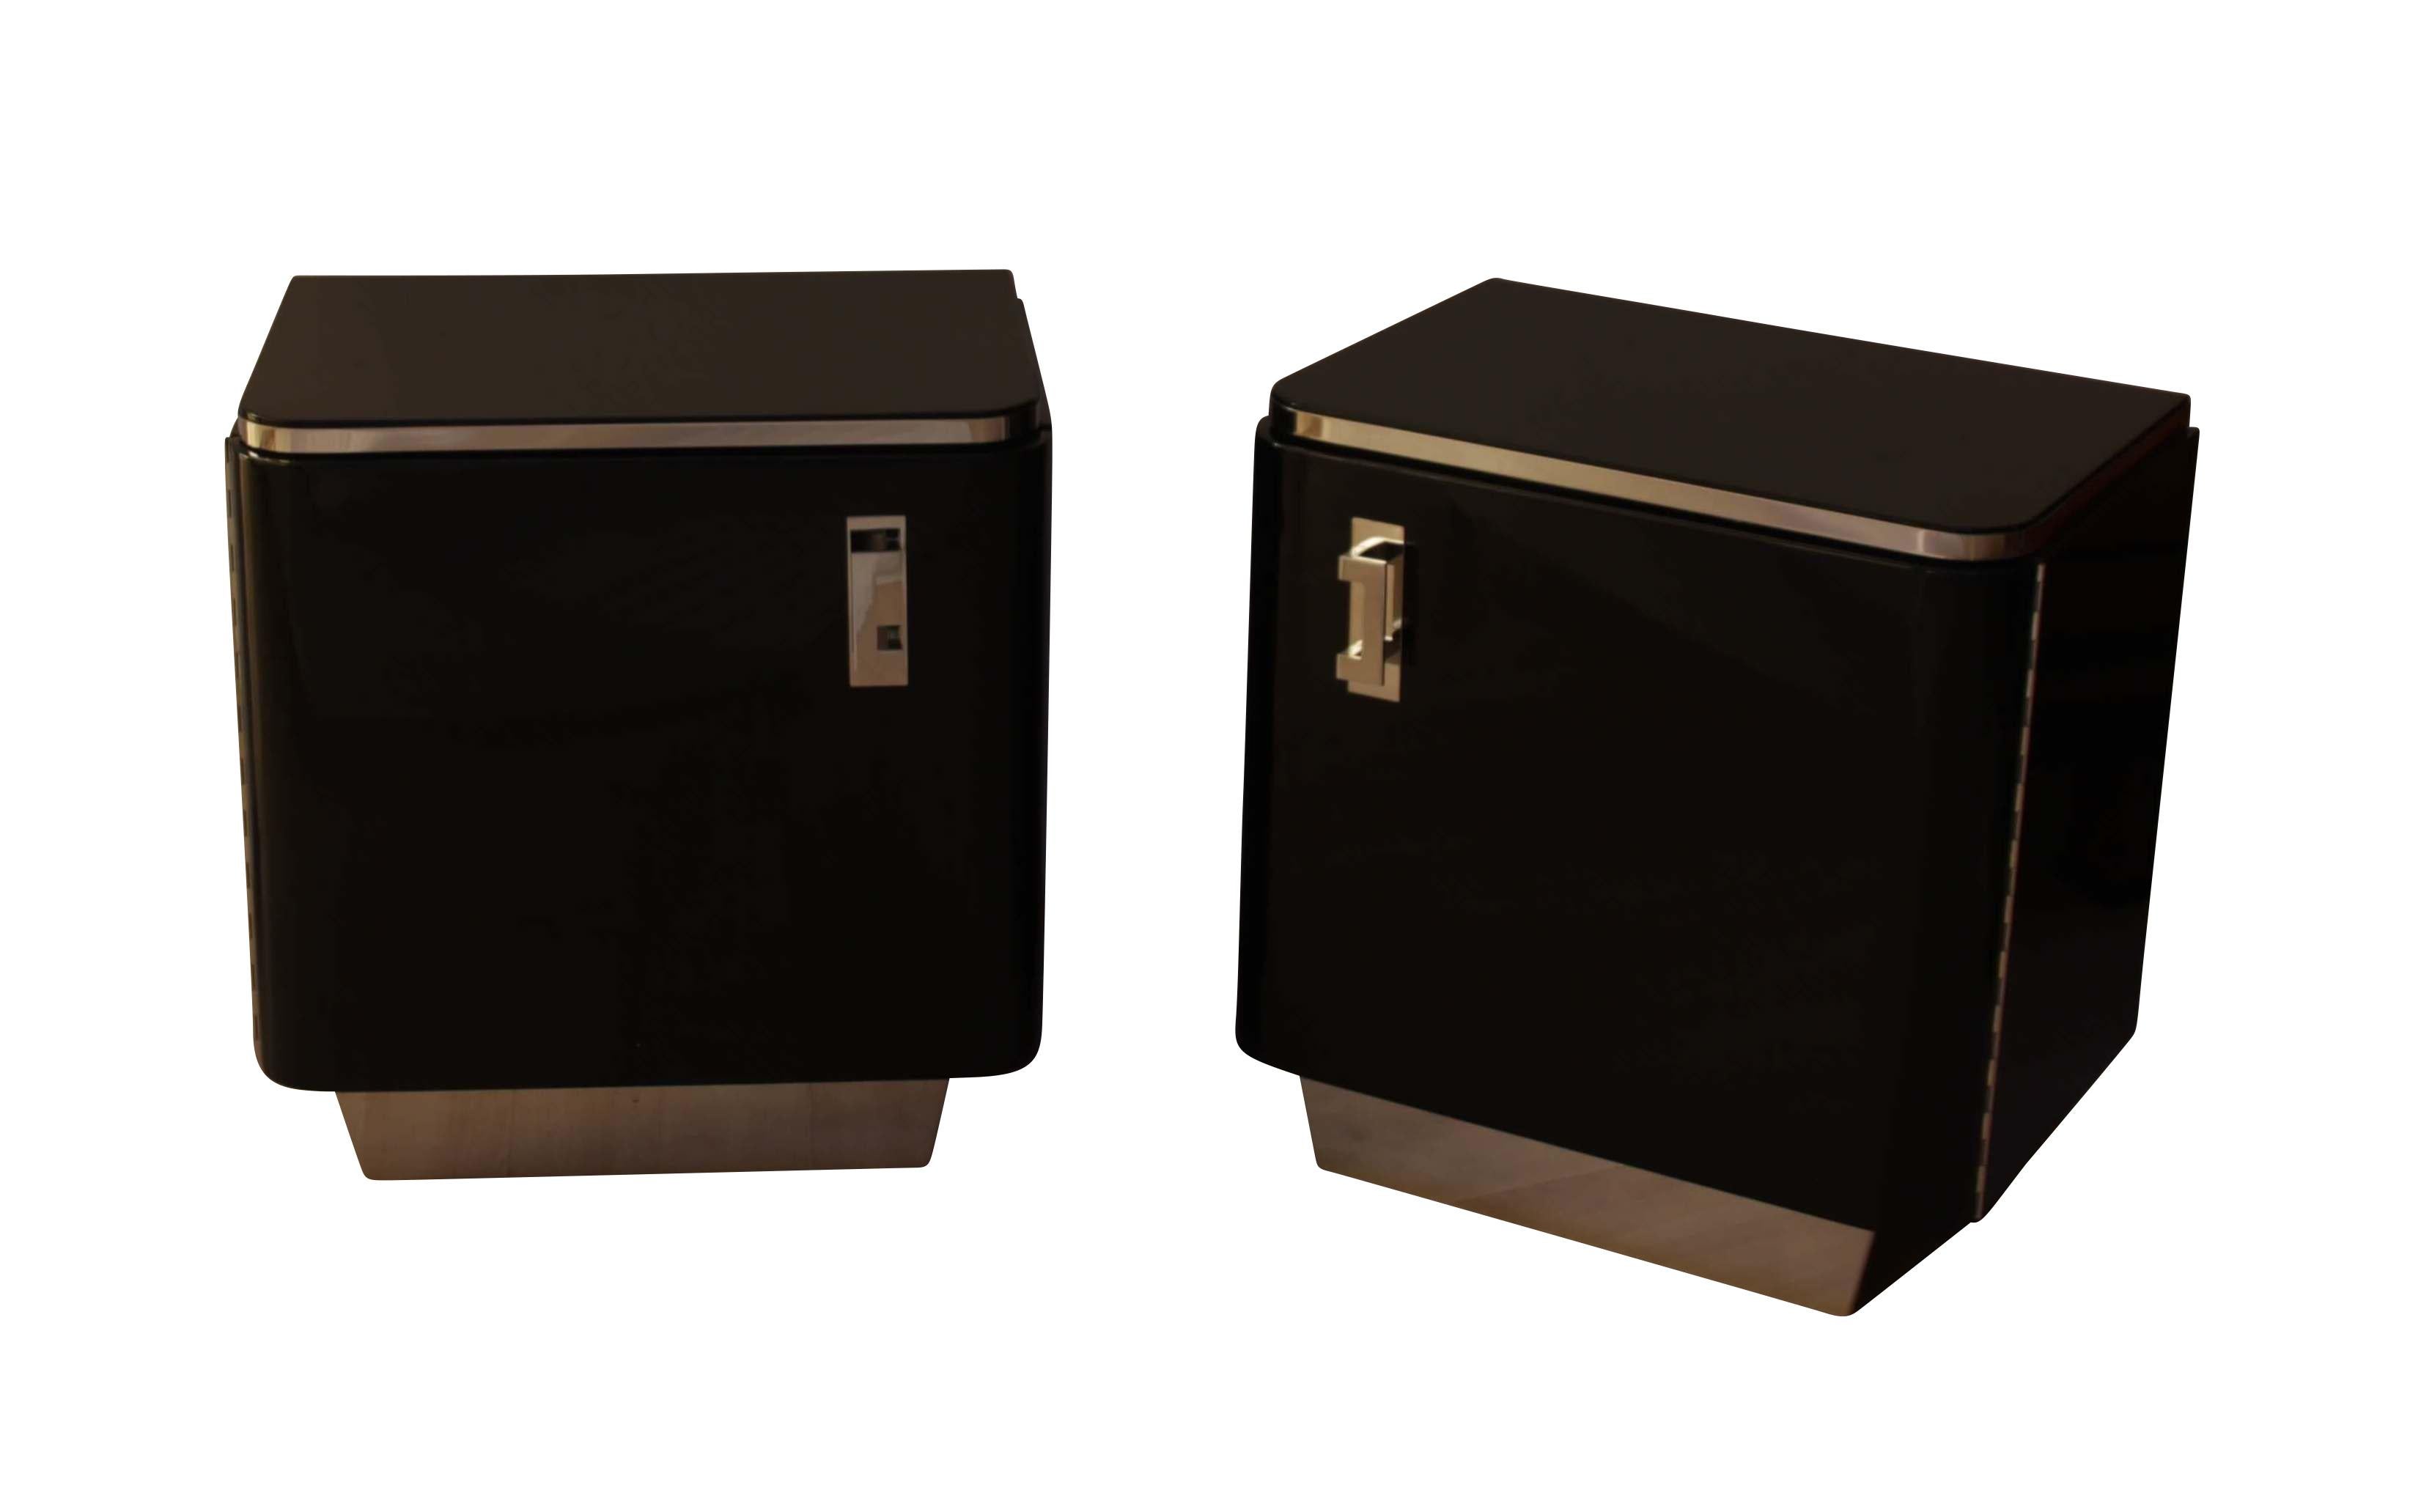 Elegant pair of German Bauhaus nightstands or bedside tables.

Each has 1 door with compartments behind, divided by 1 shelf.

The solid walnut wood underneath has been lacquered and polished in black with Piano lacquer. Around the top and legs